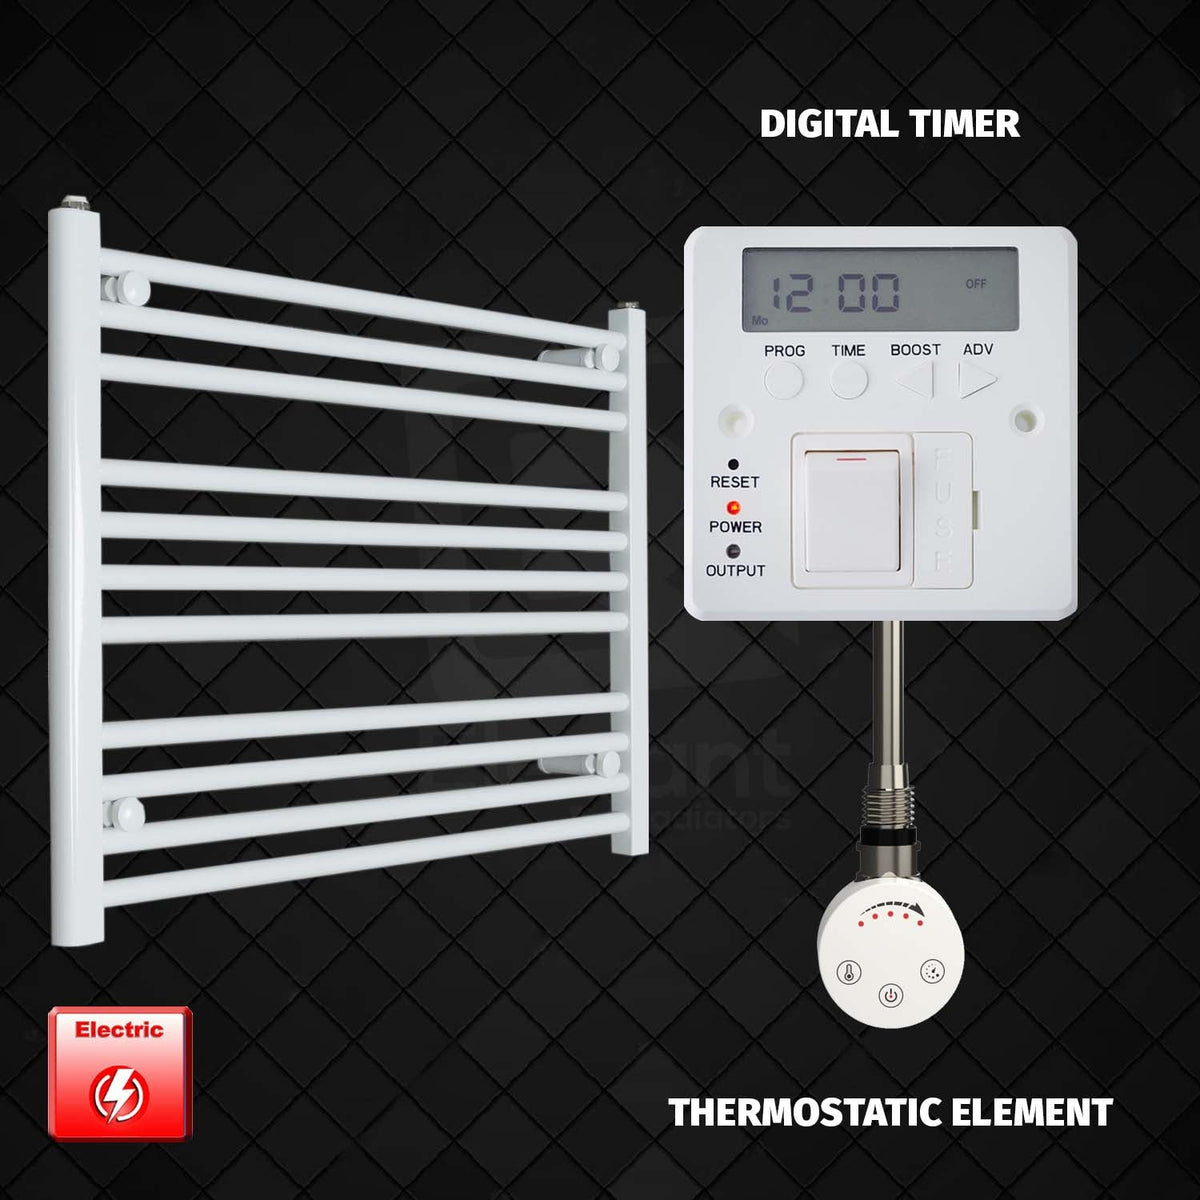 600 x 900 Pre-Filled Electric Heated Towel Radiator White HTR SMR Thermostatic element Digital timer